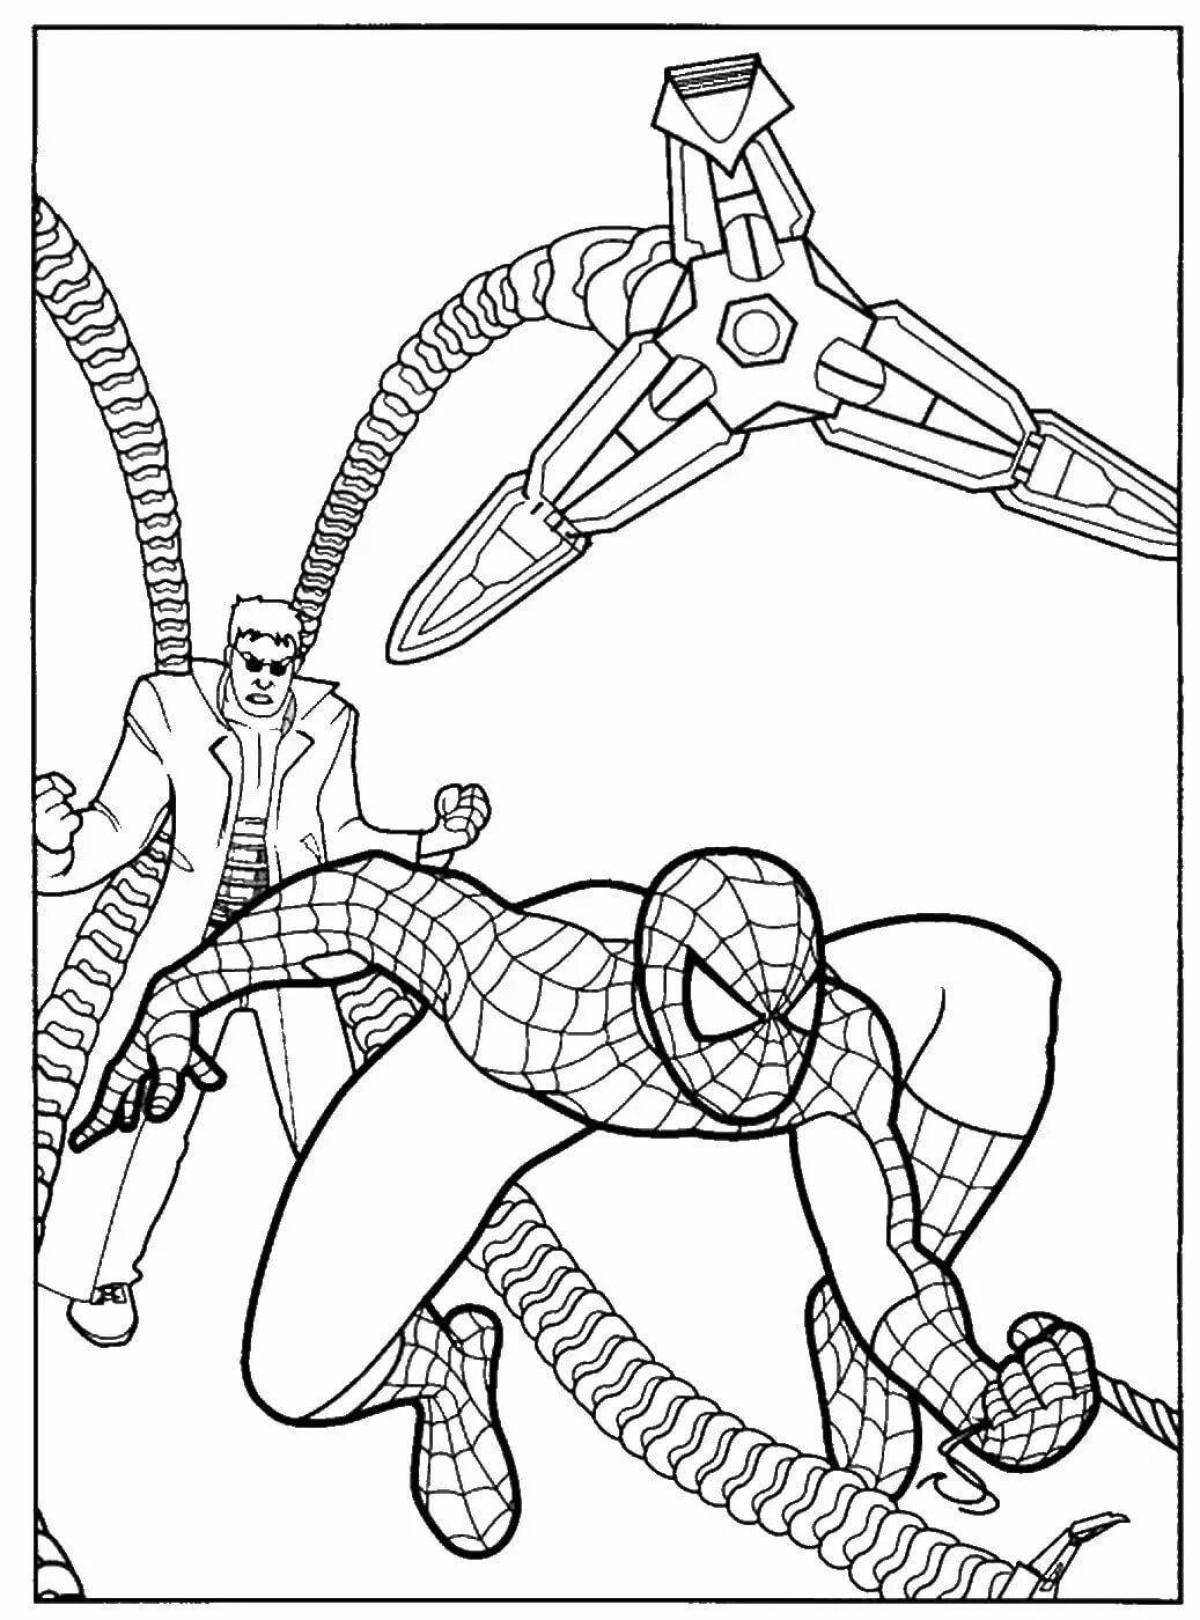 Tempting coloring book spider-man with claws